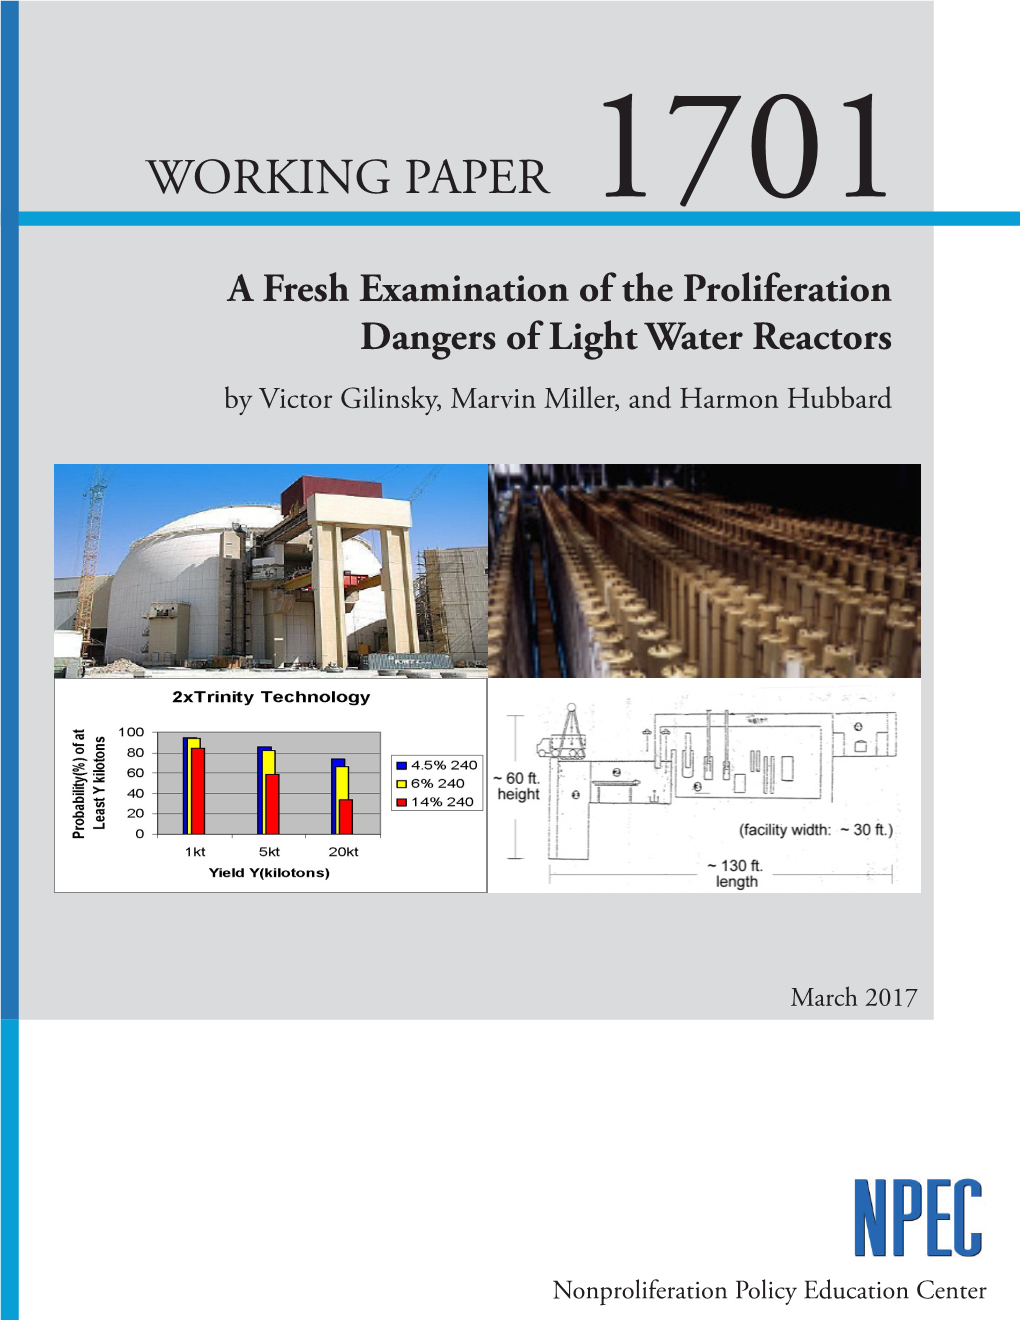 A Fresh Examination of the Proliferation Dangers of Light Water Reactors by Victor Gilinsky, Marvin Miller, and Harmon Hubbard